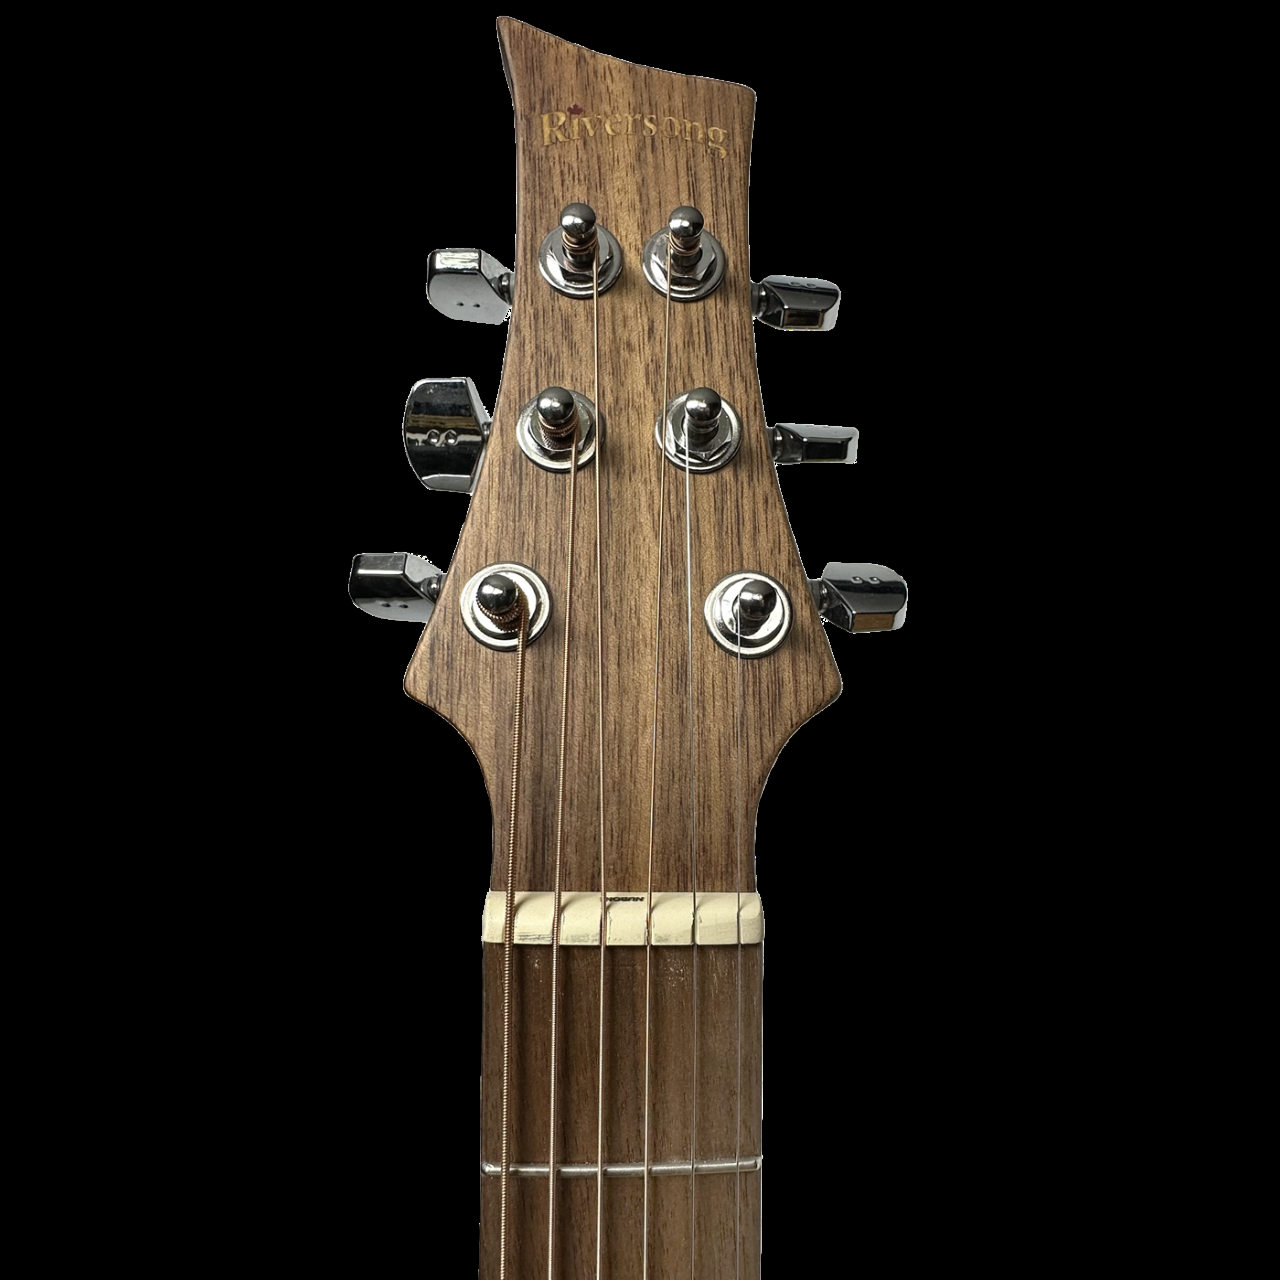 The unique and compact design of the Riversong 2P GA G2 Headstock